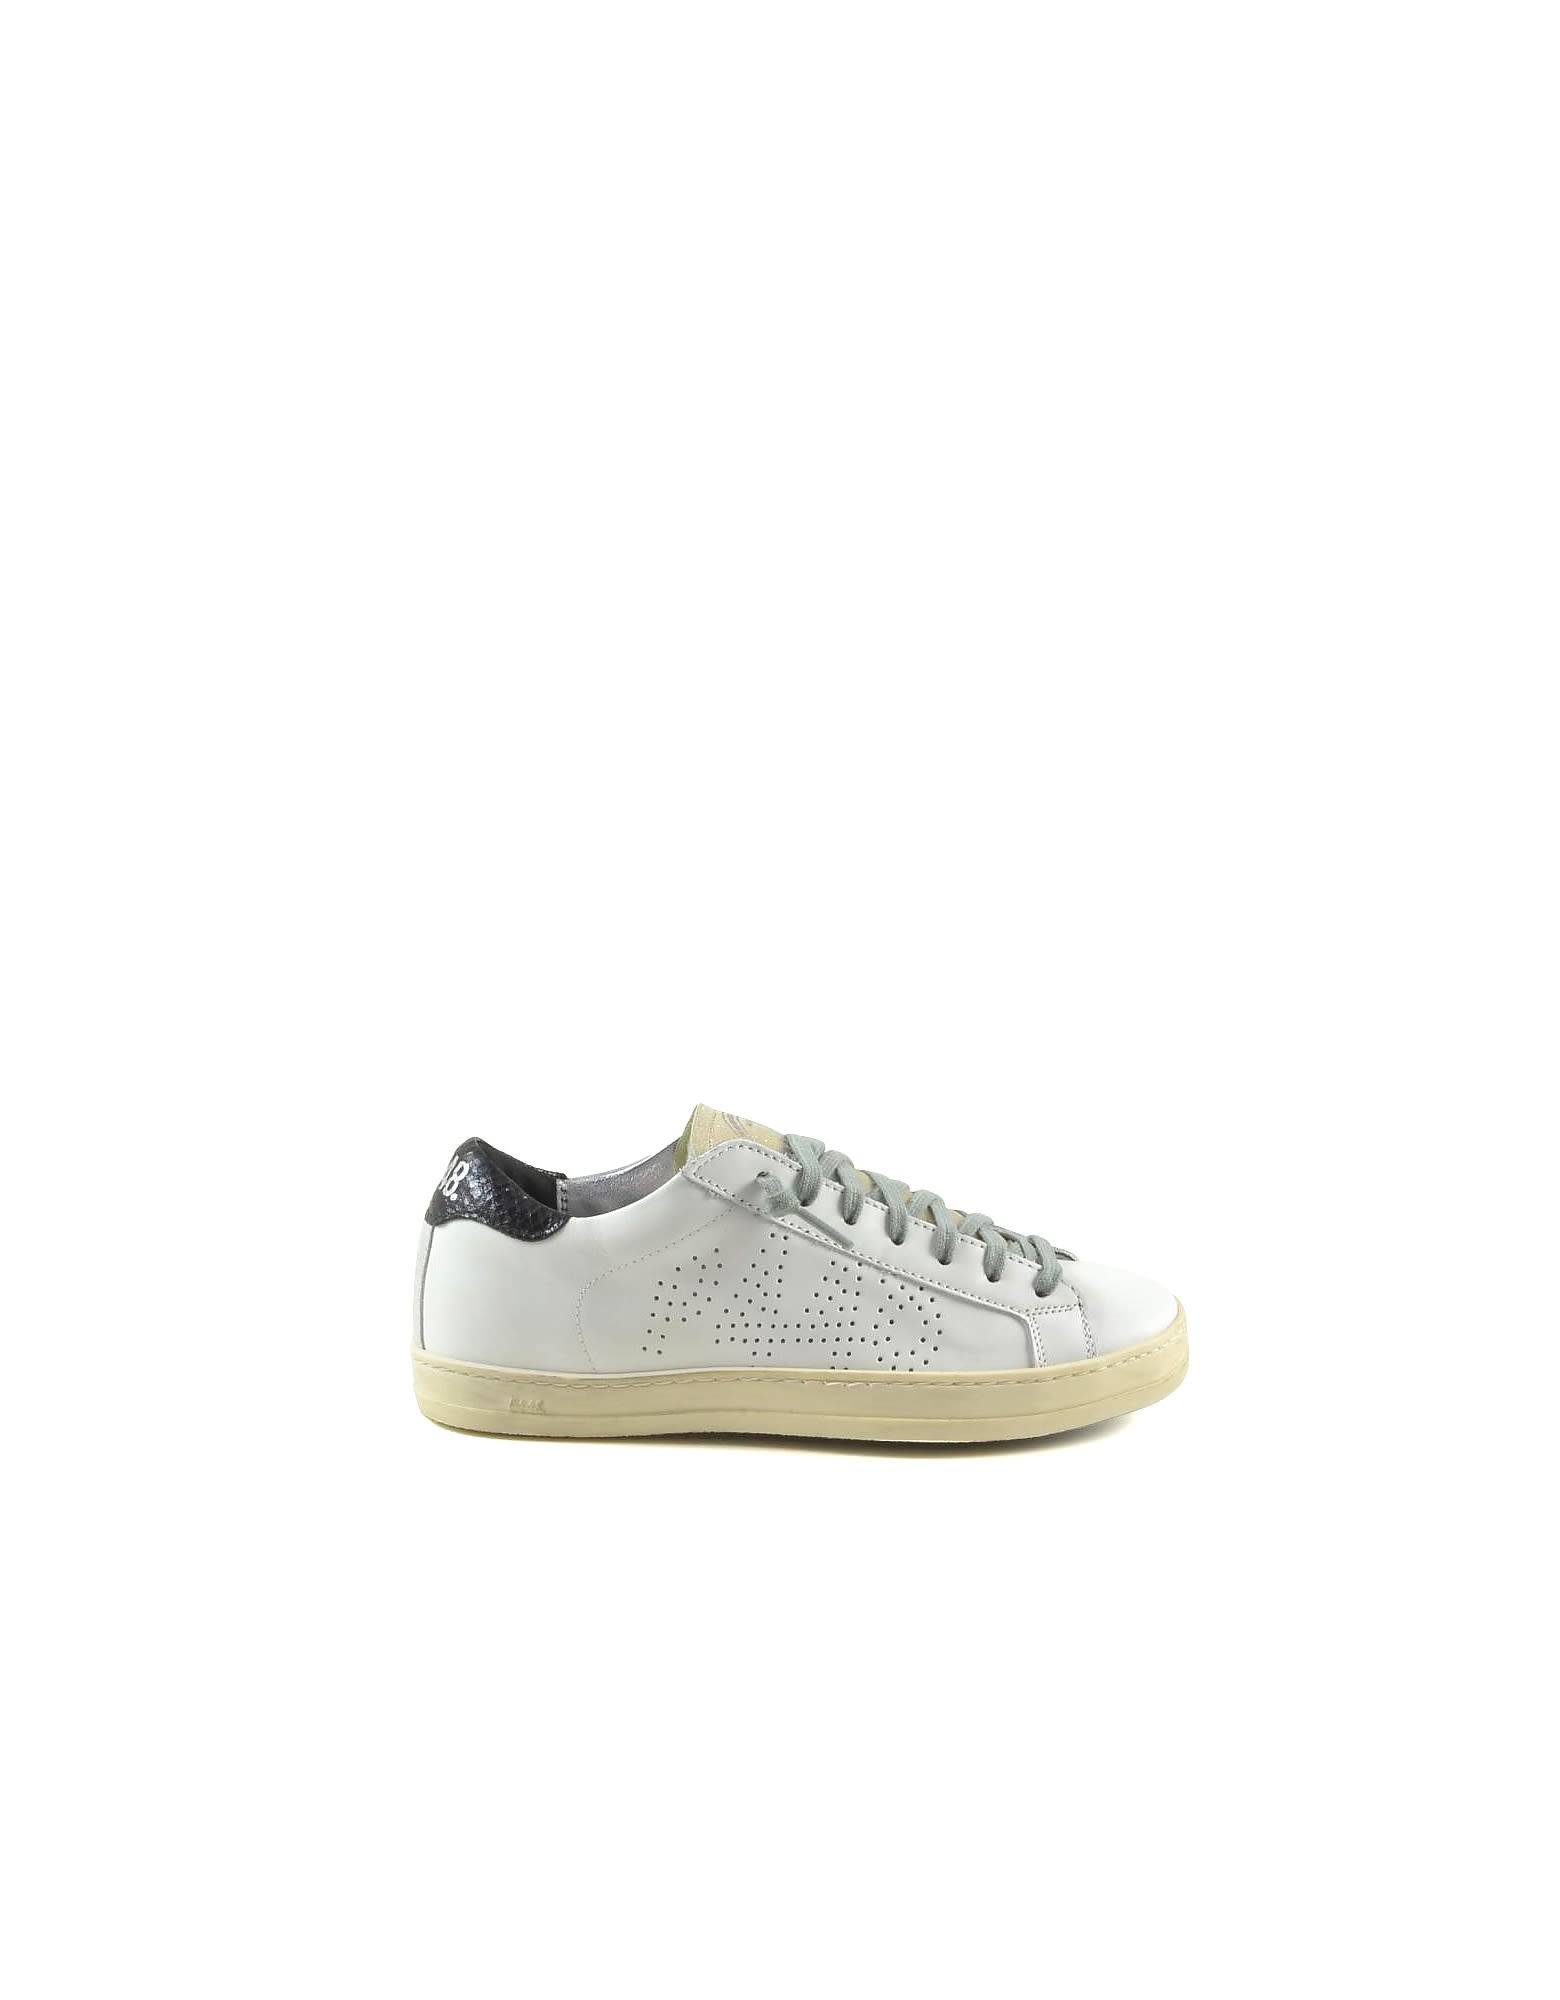 P448 White Leather Womens Sneakers W/black Signature Details